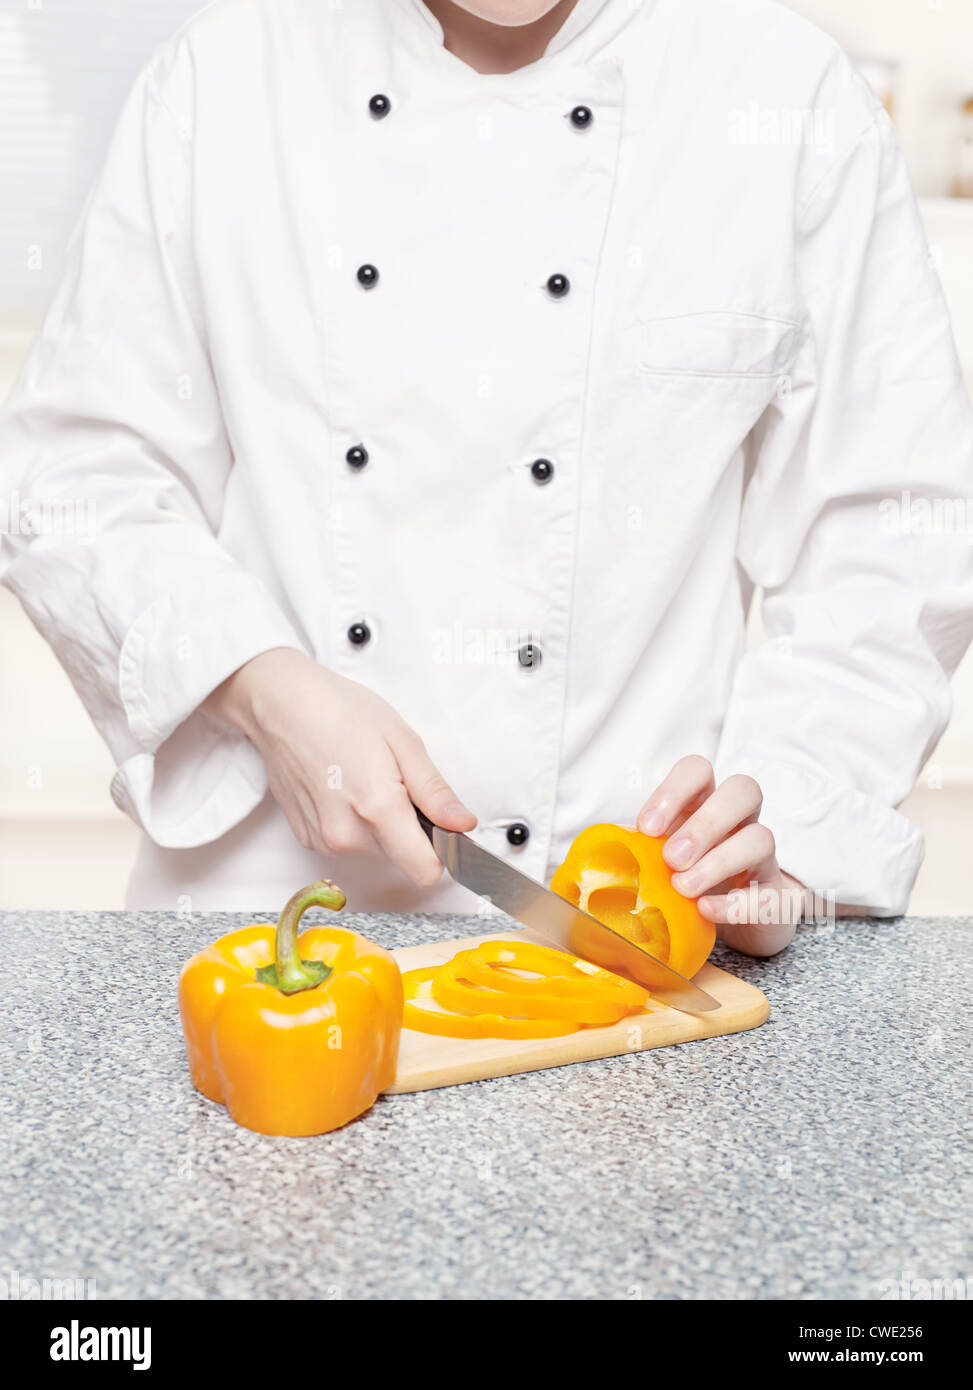 chef cutting bell peppers on board Stock Photo